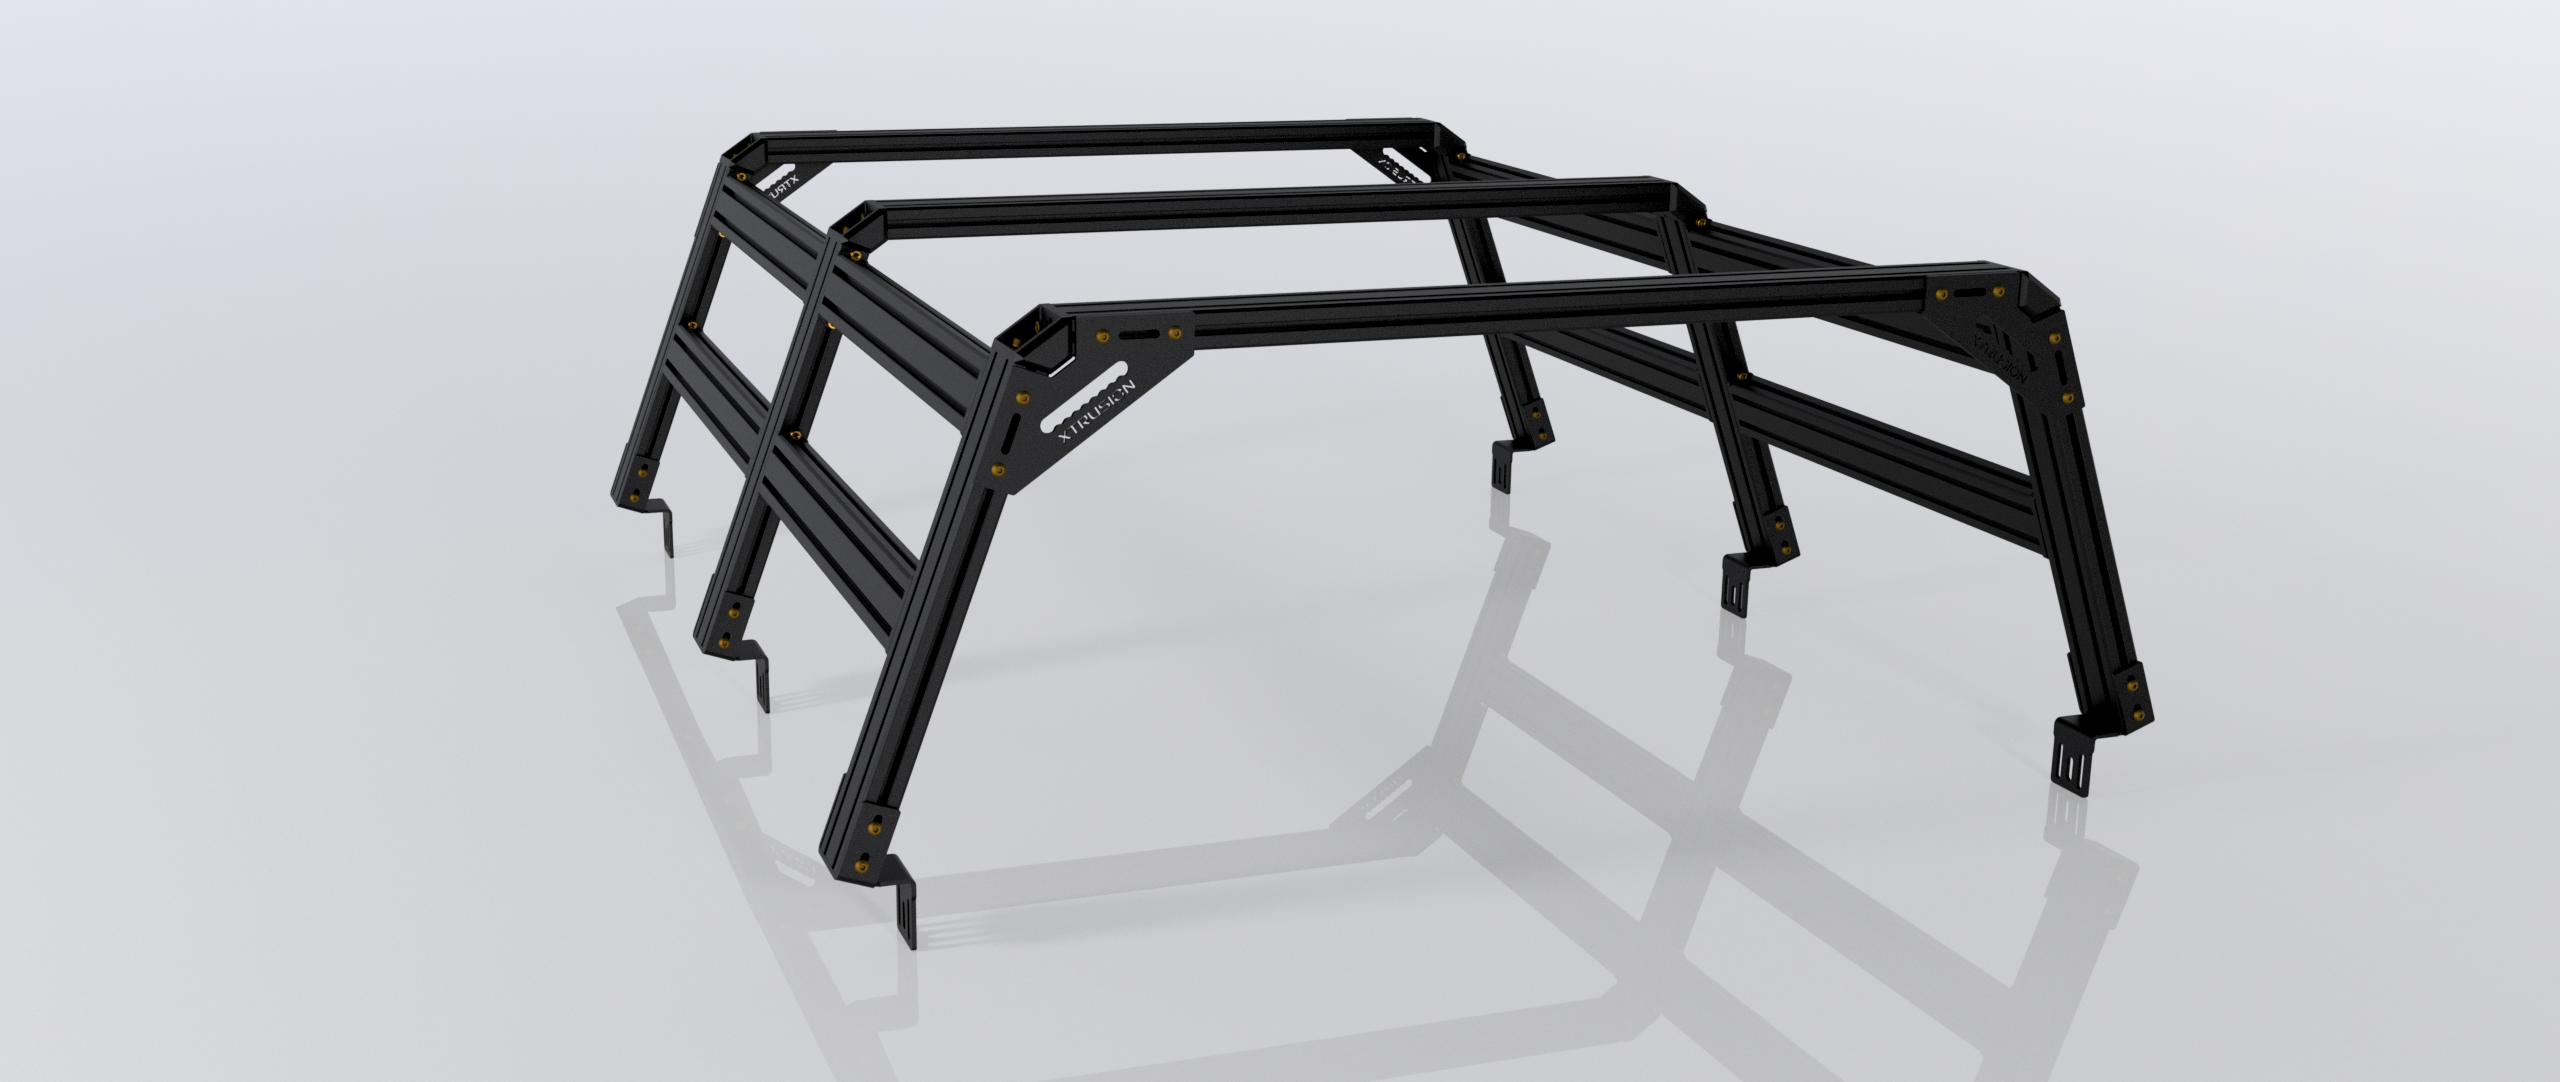 XTR3 Bed Rack for Nissan Frontier